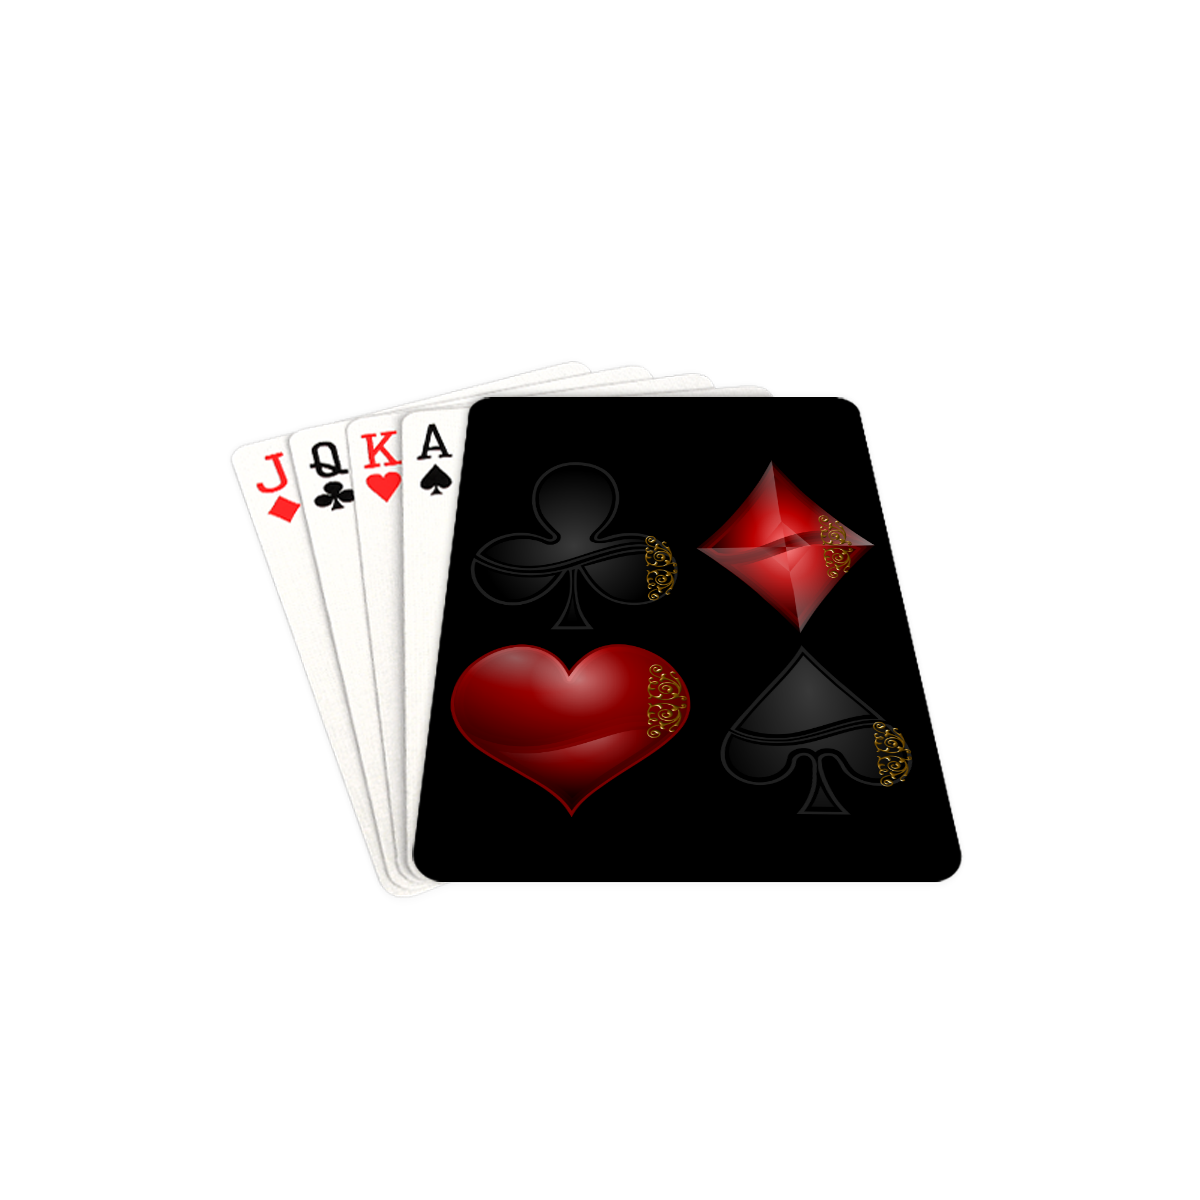 Las Vegas Black and Red Casino Poker Card Shapes on Black Playing Cards 2.5"x3.5"